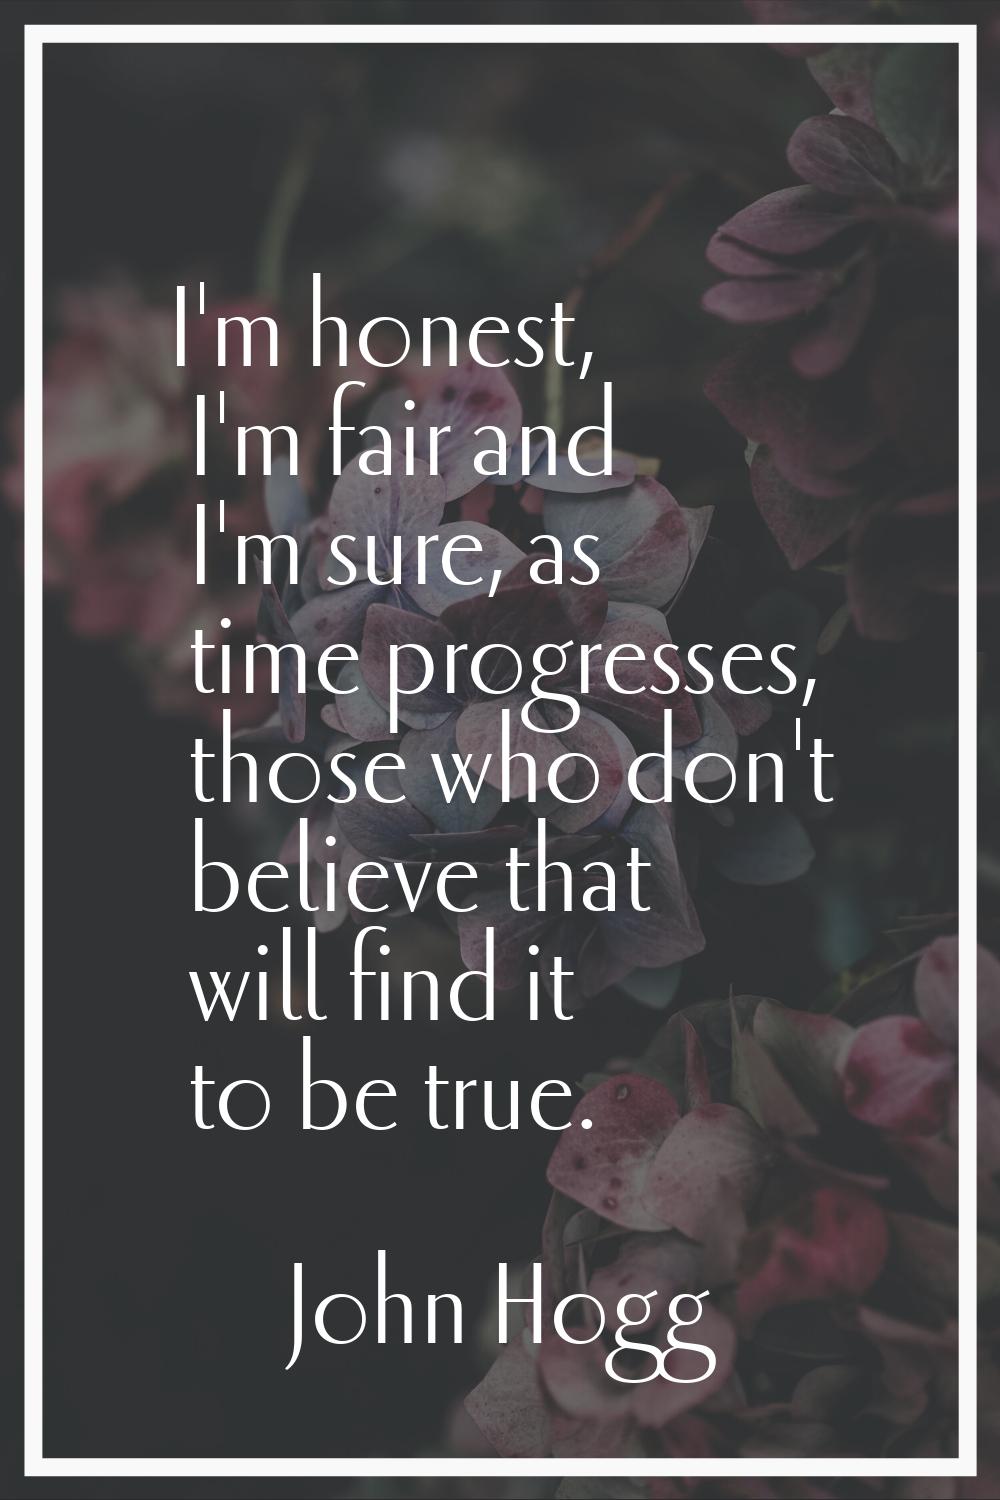 I'm honest, I'm fair and I'm sure, as time progresses, those who don't believe that will find it to